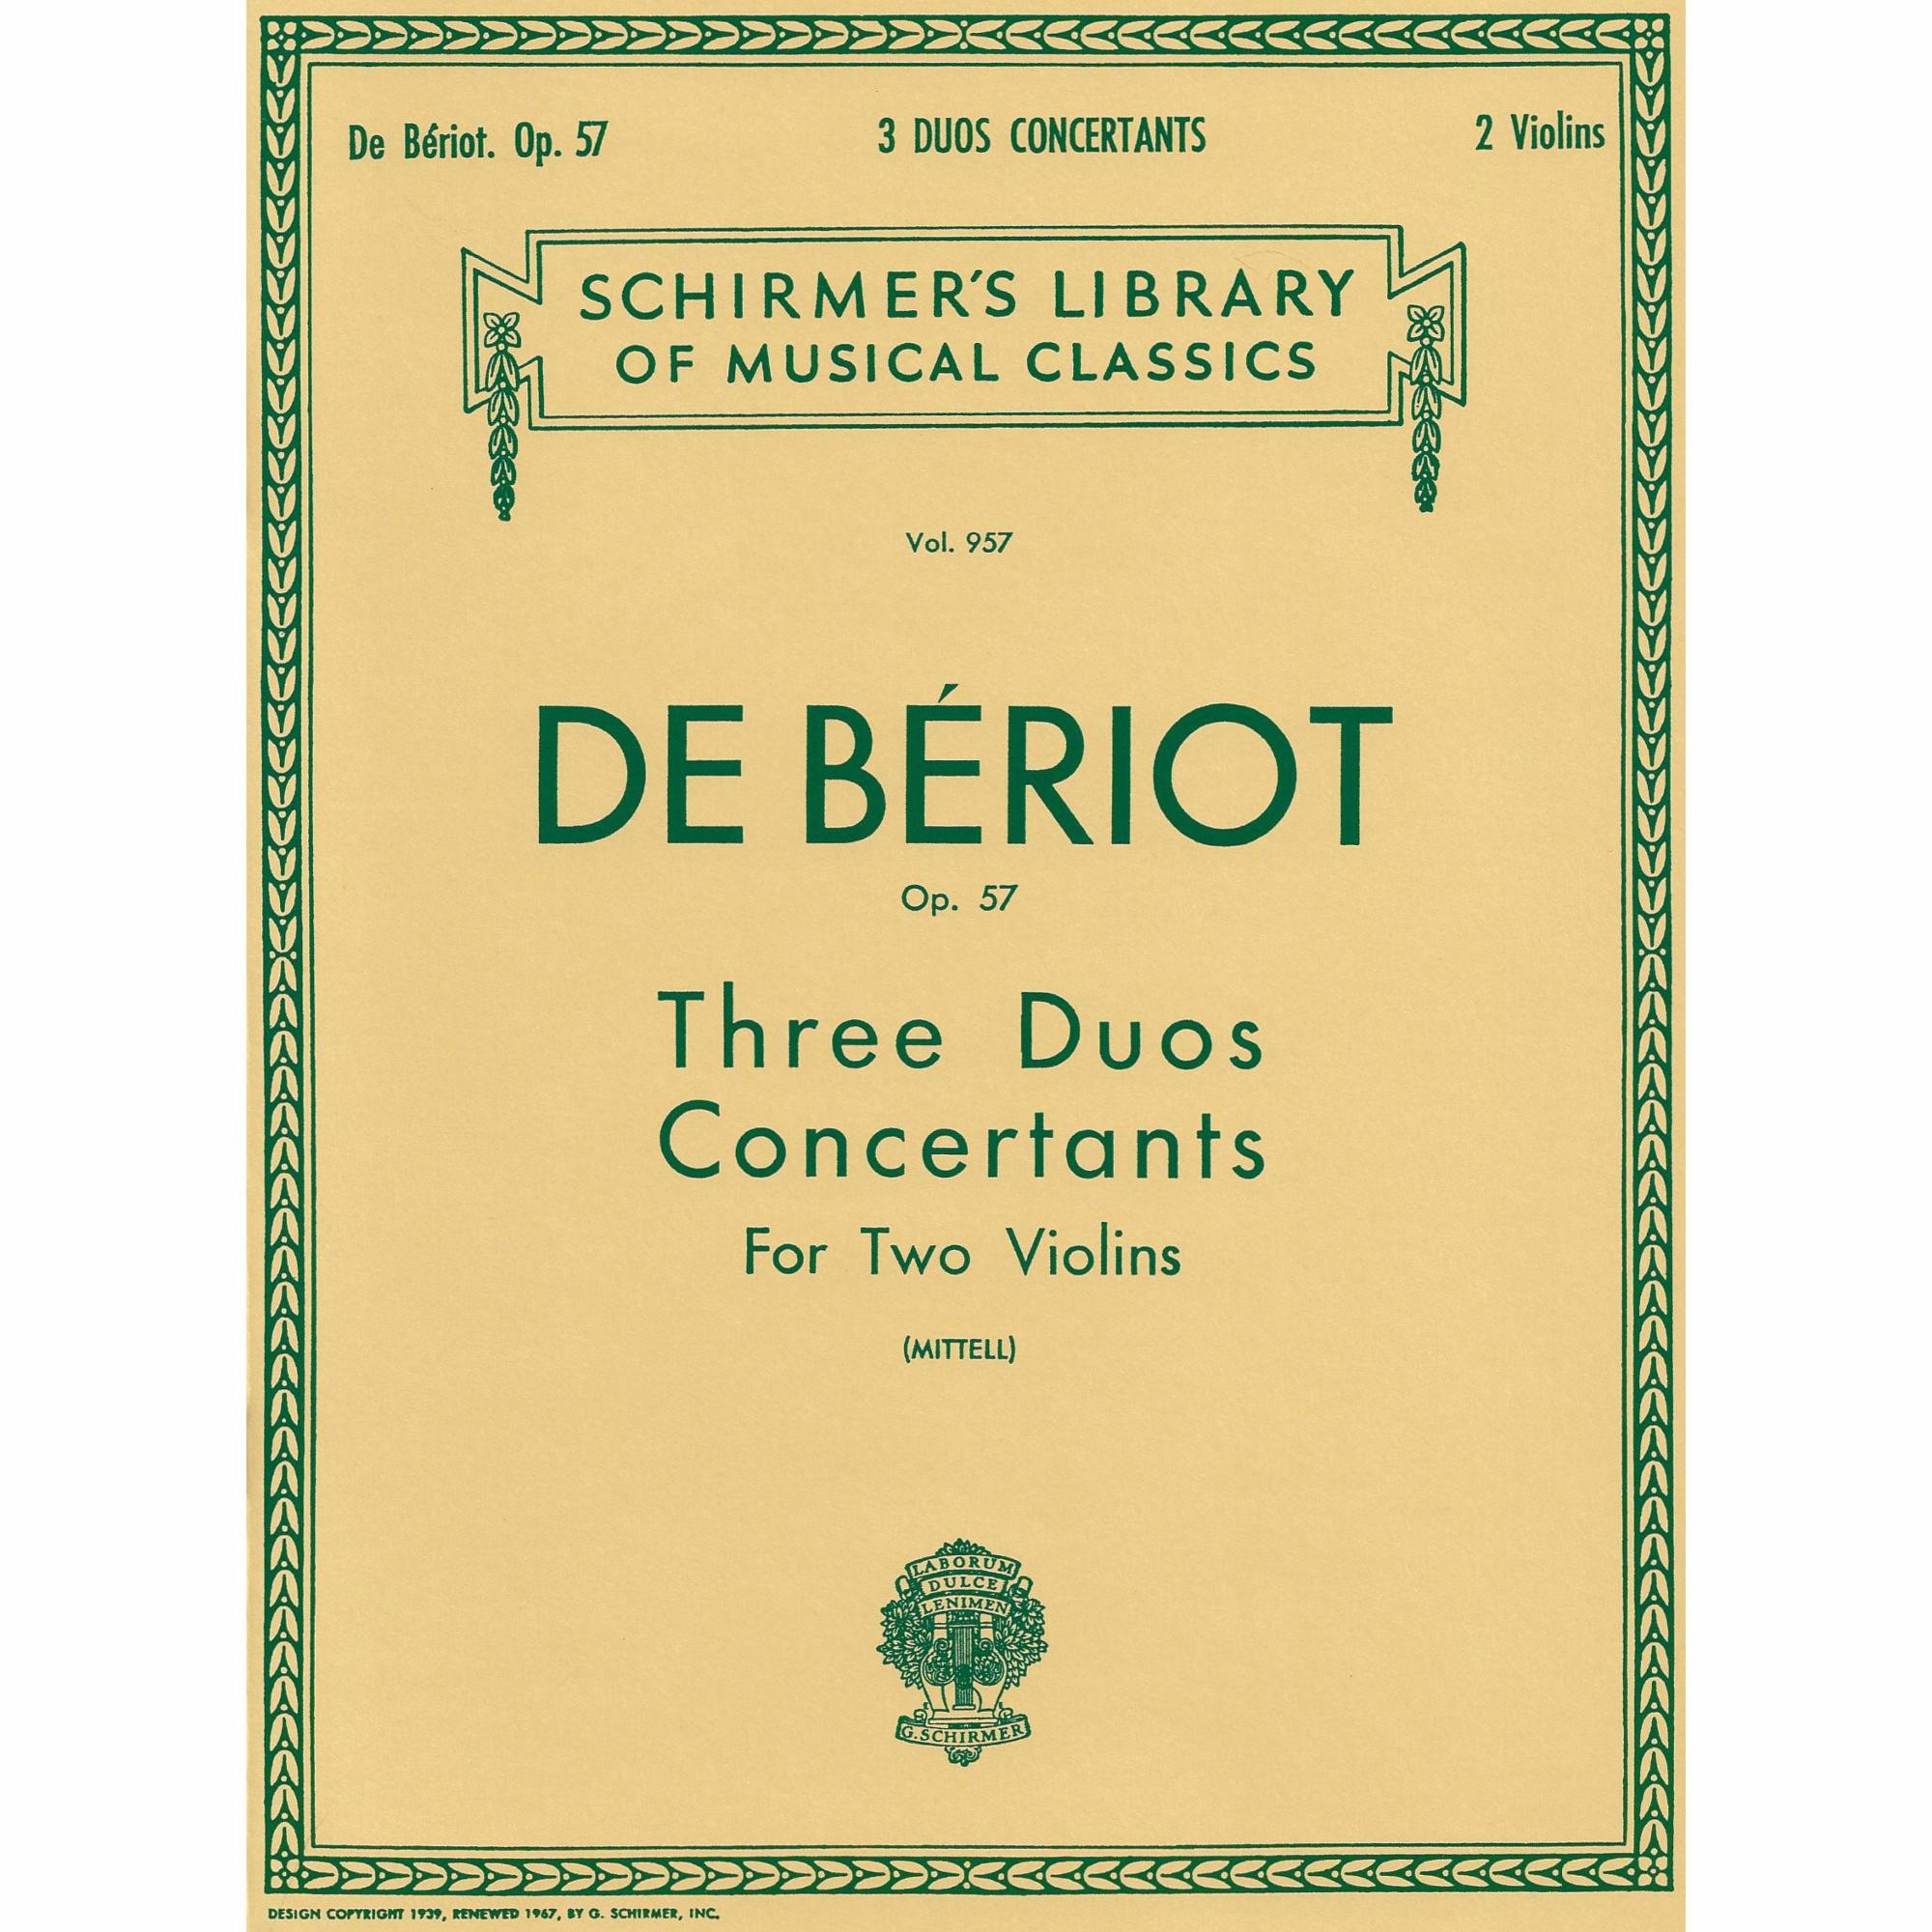 Beriot -- Three Duos Concertants, Op. 57 for Two Violins